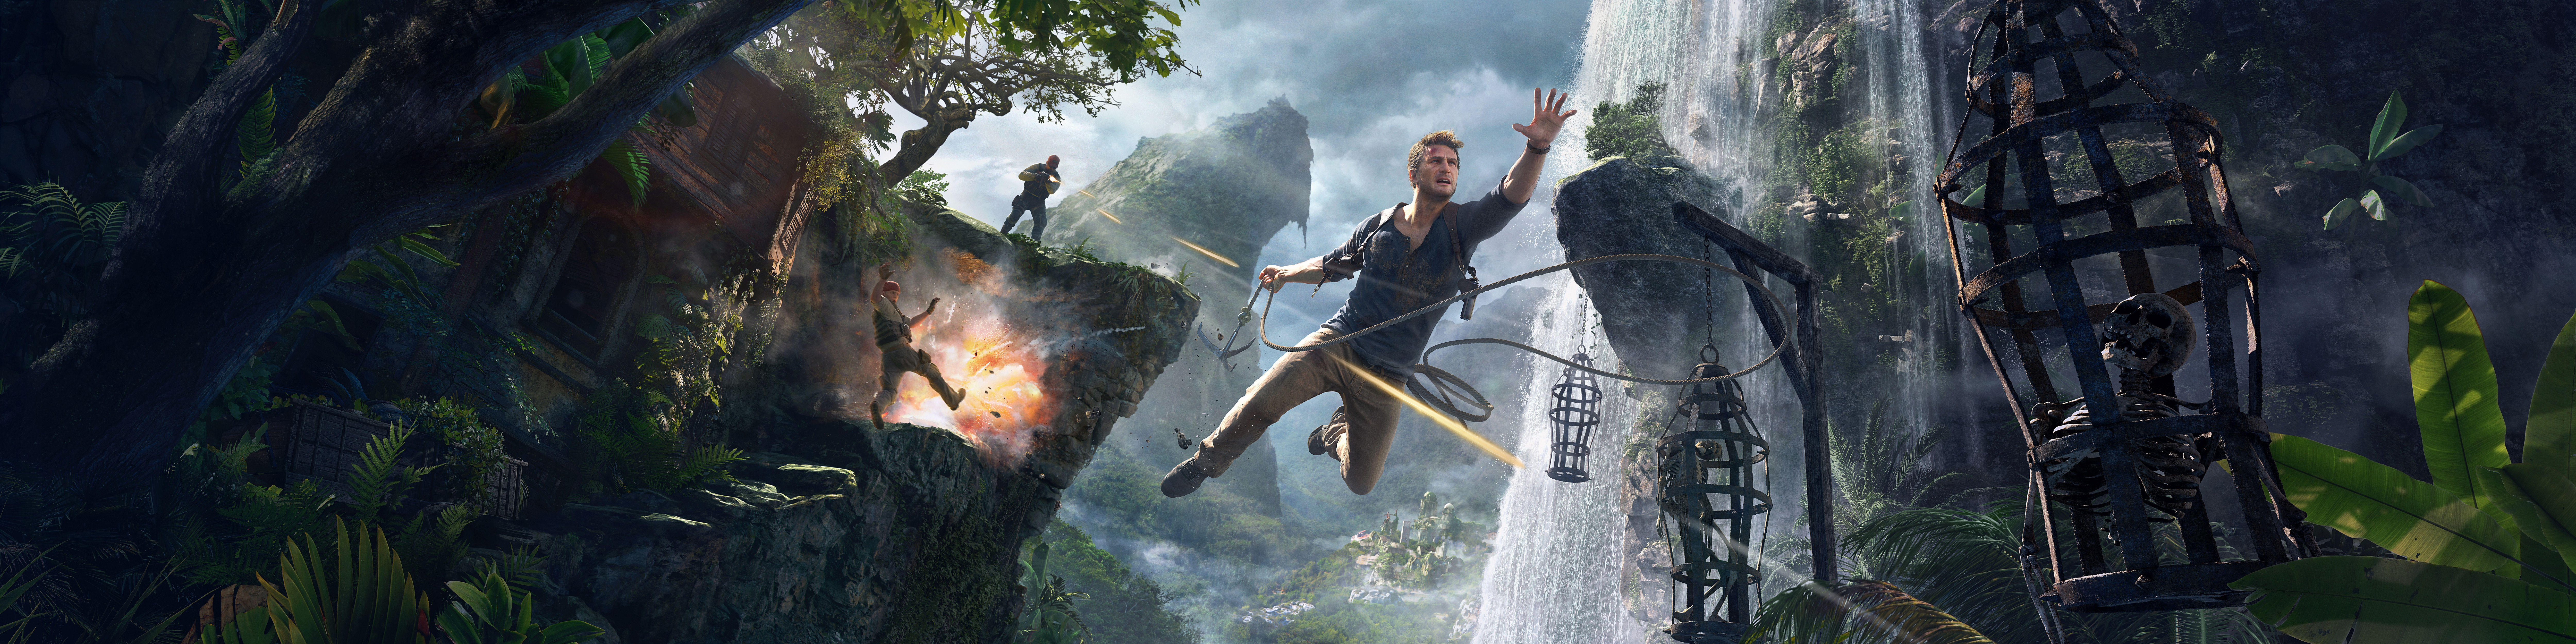 Wallpaper Uncharted 4: A Thief's End, 2016 Games, PS Games